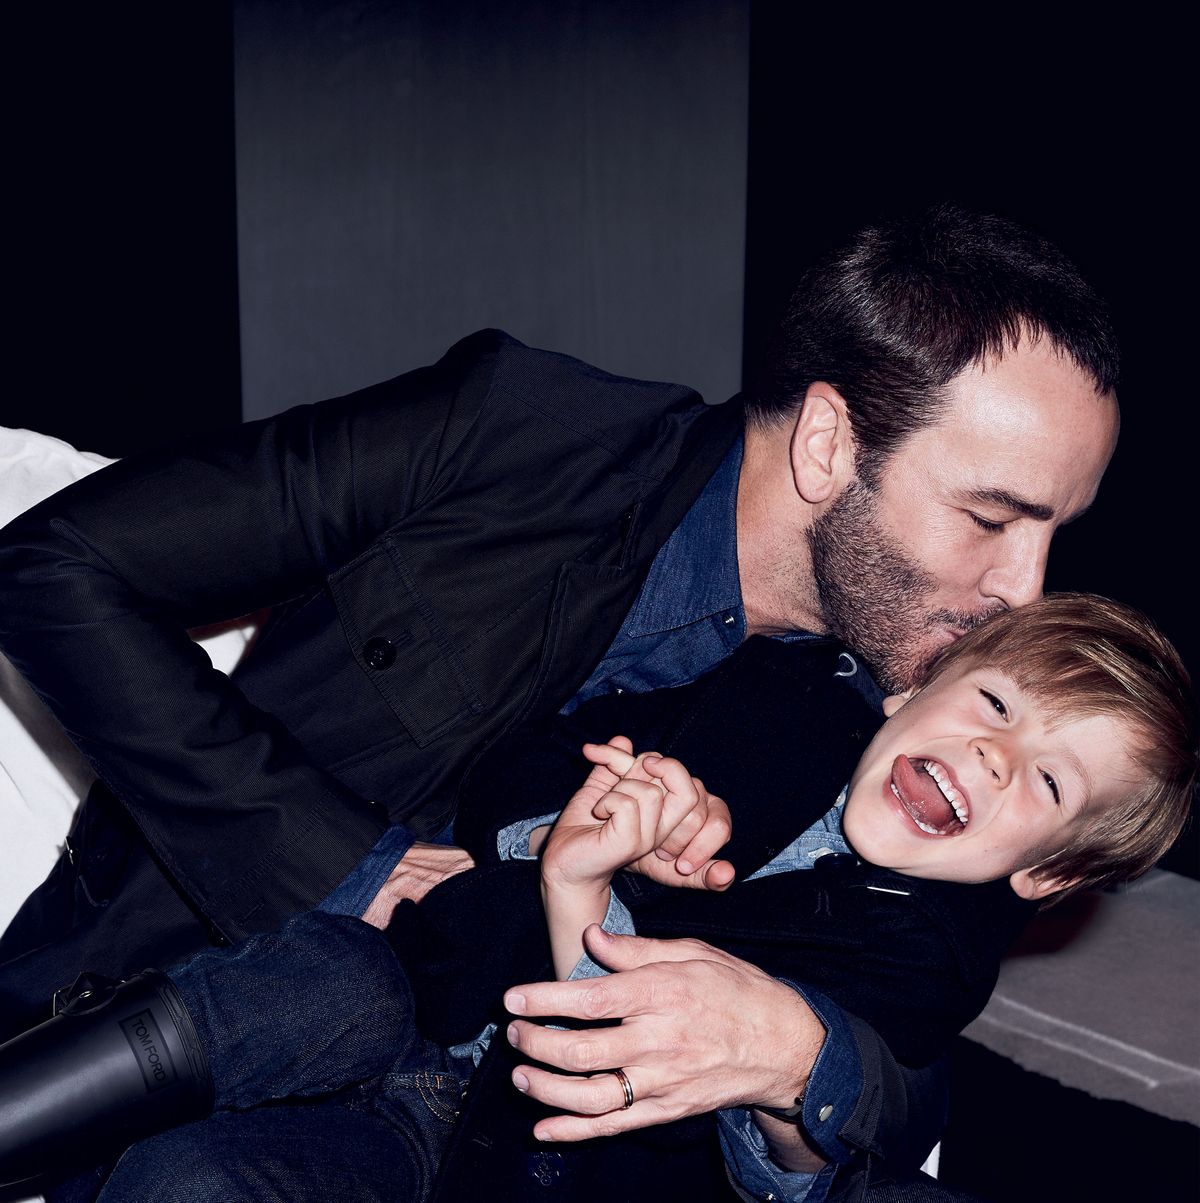 Tom Ford Biography, Who is Tom Ford & About Tom Ford